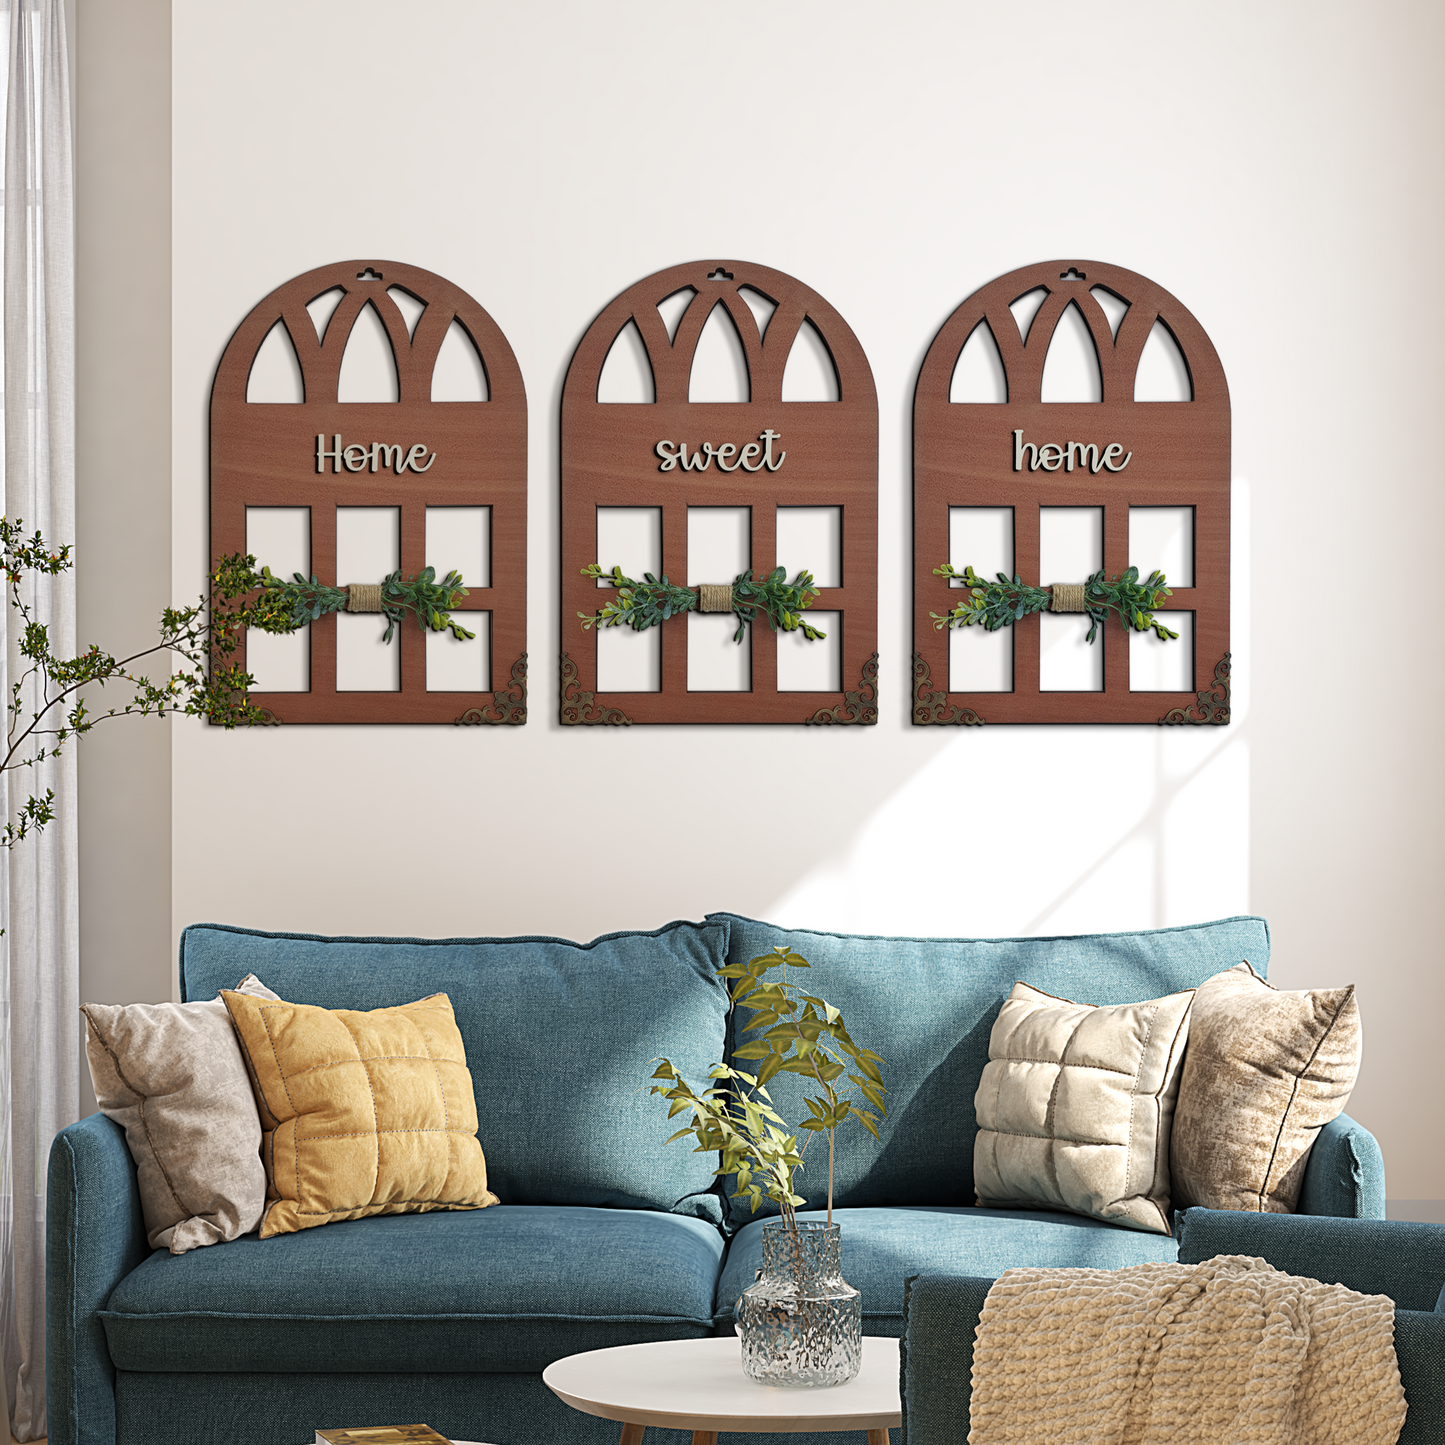 Home Sweet Home Quote Window Wall Art Set of 3